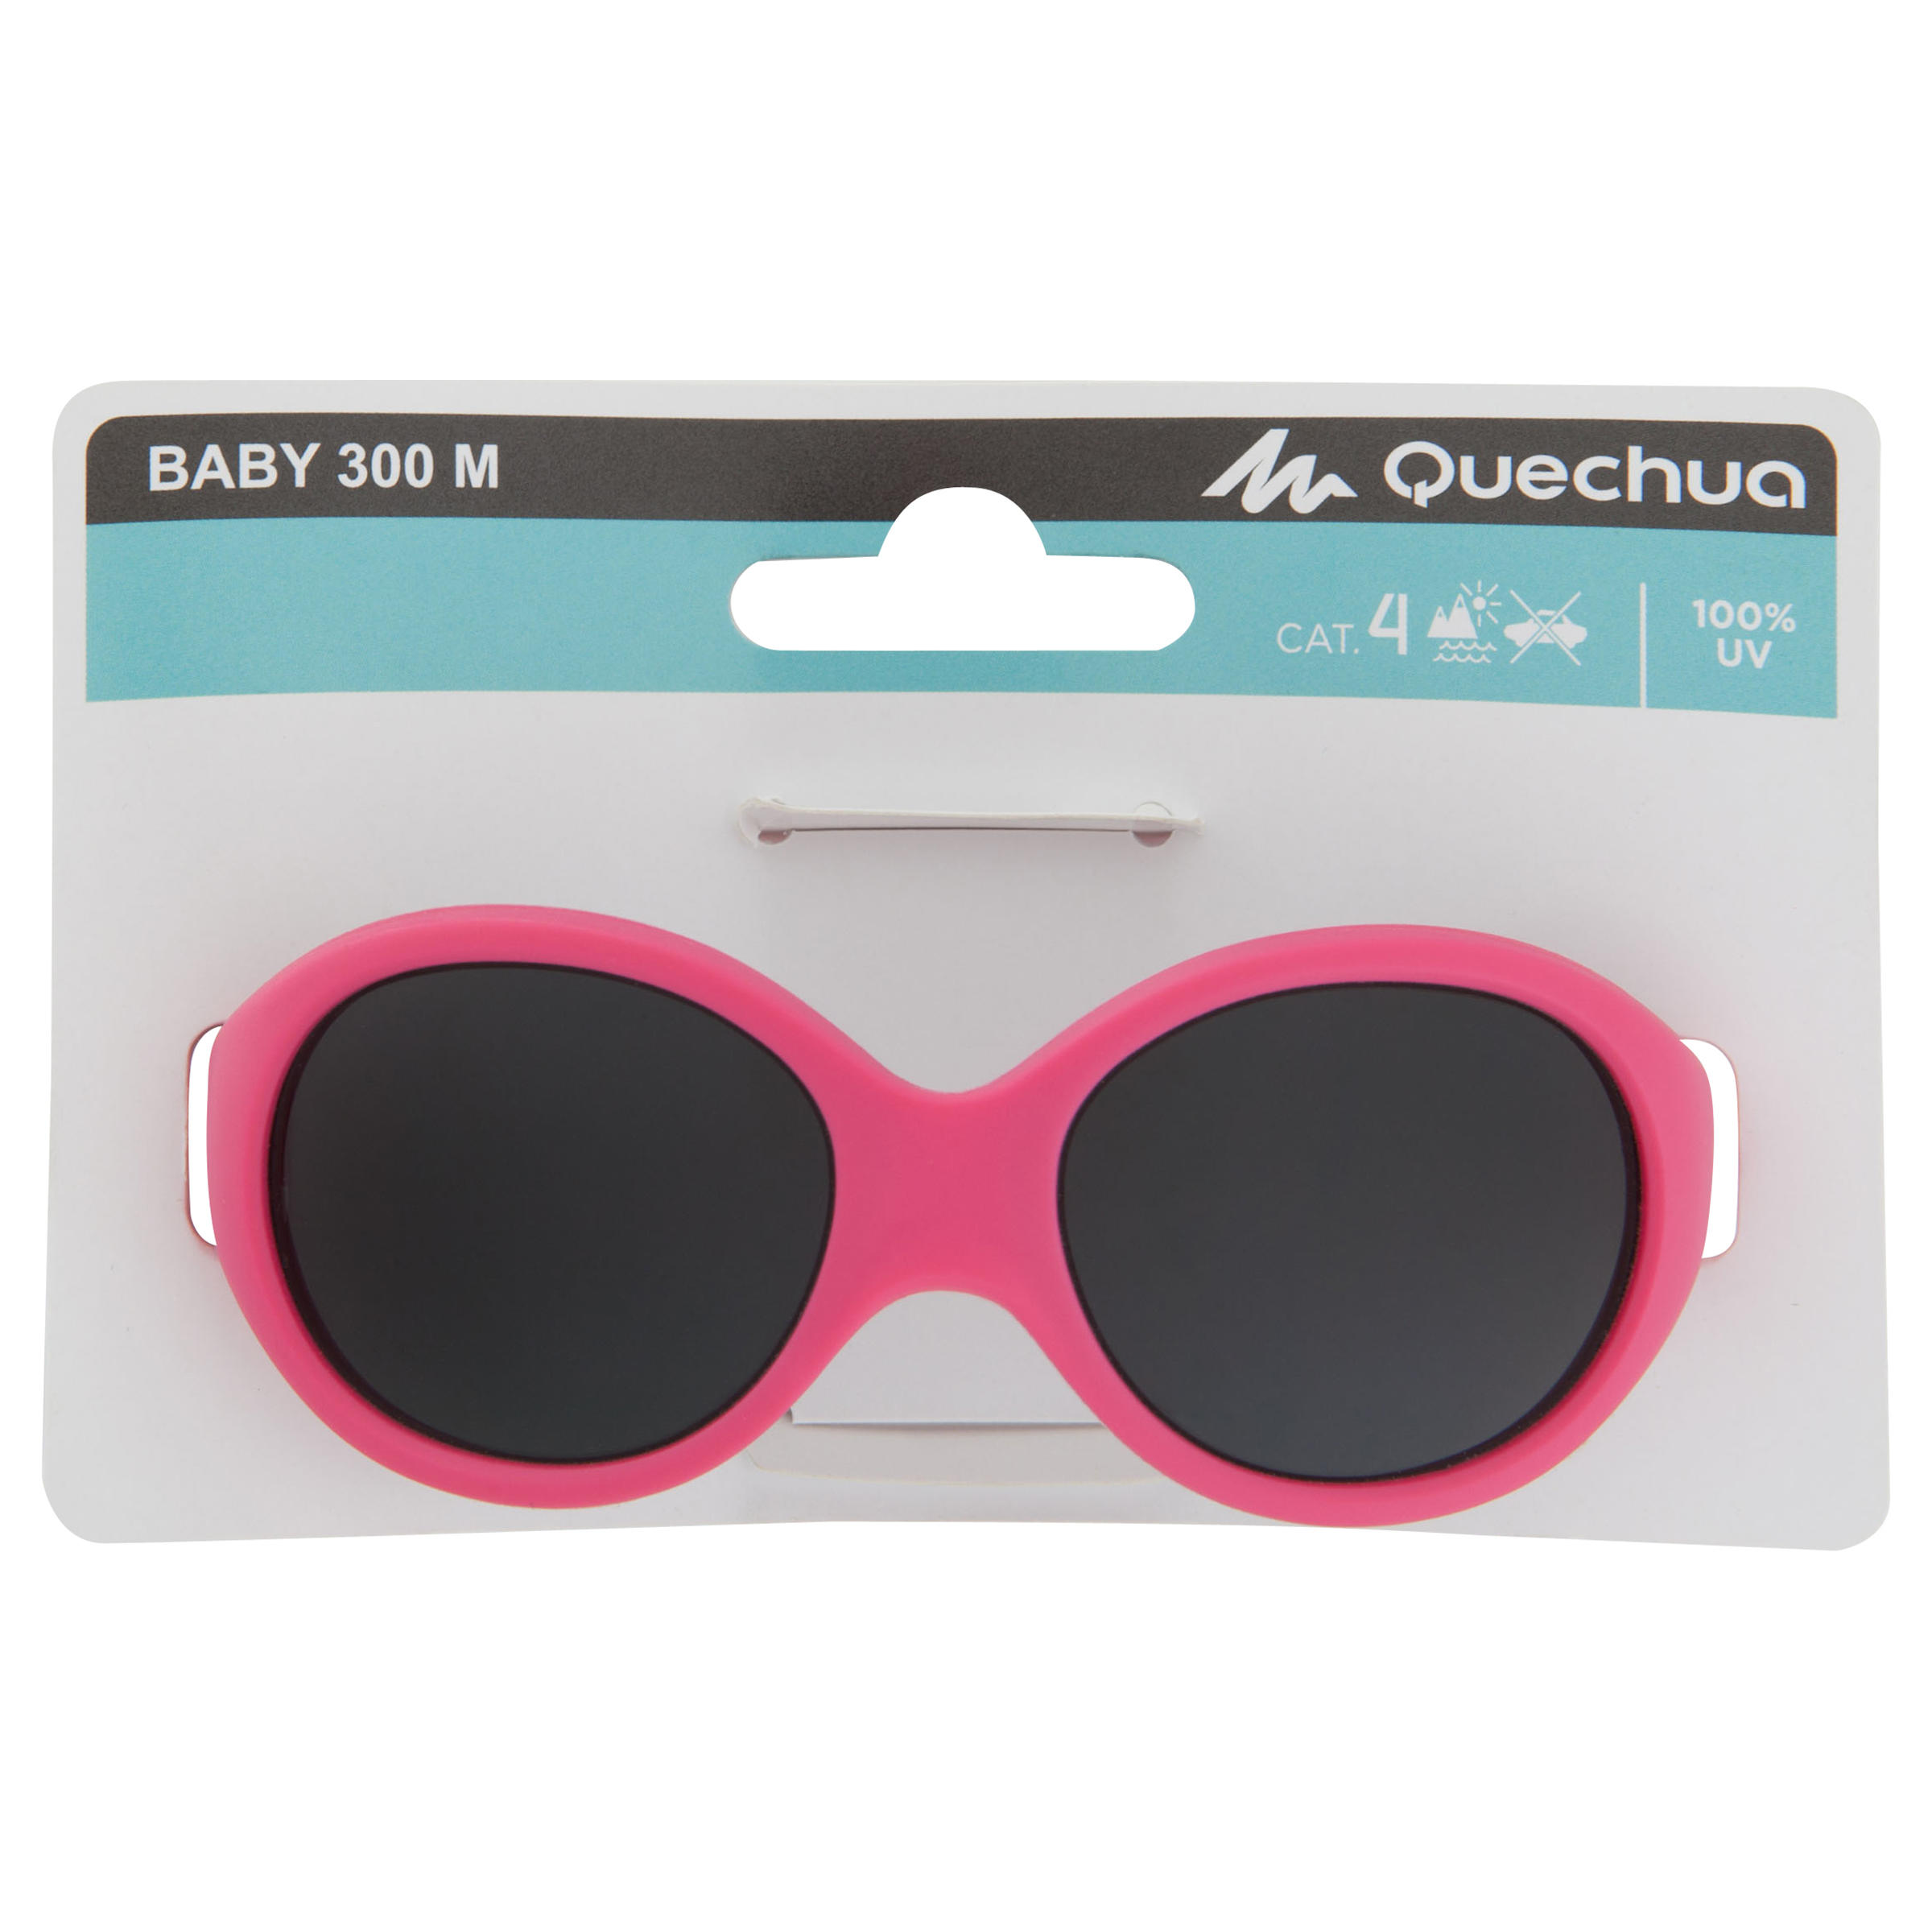 sunglasses for 4 month old baby